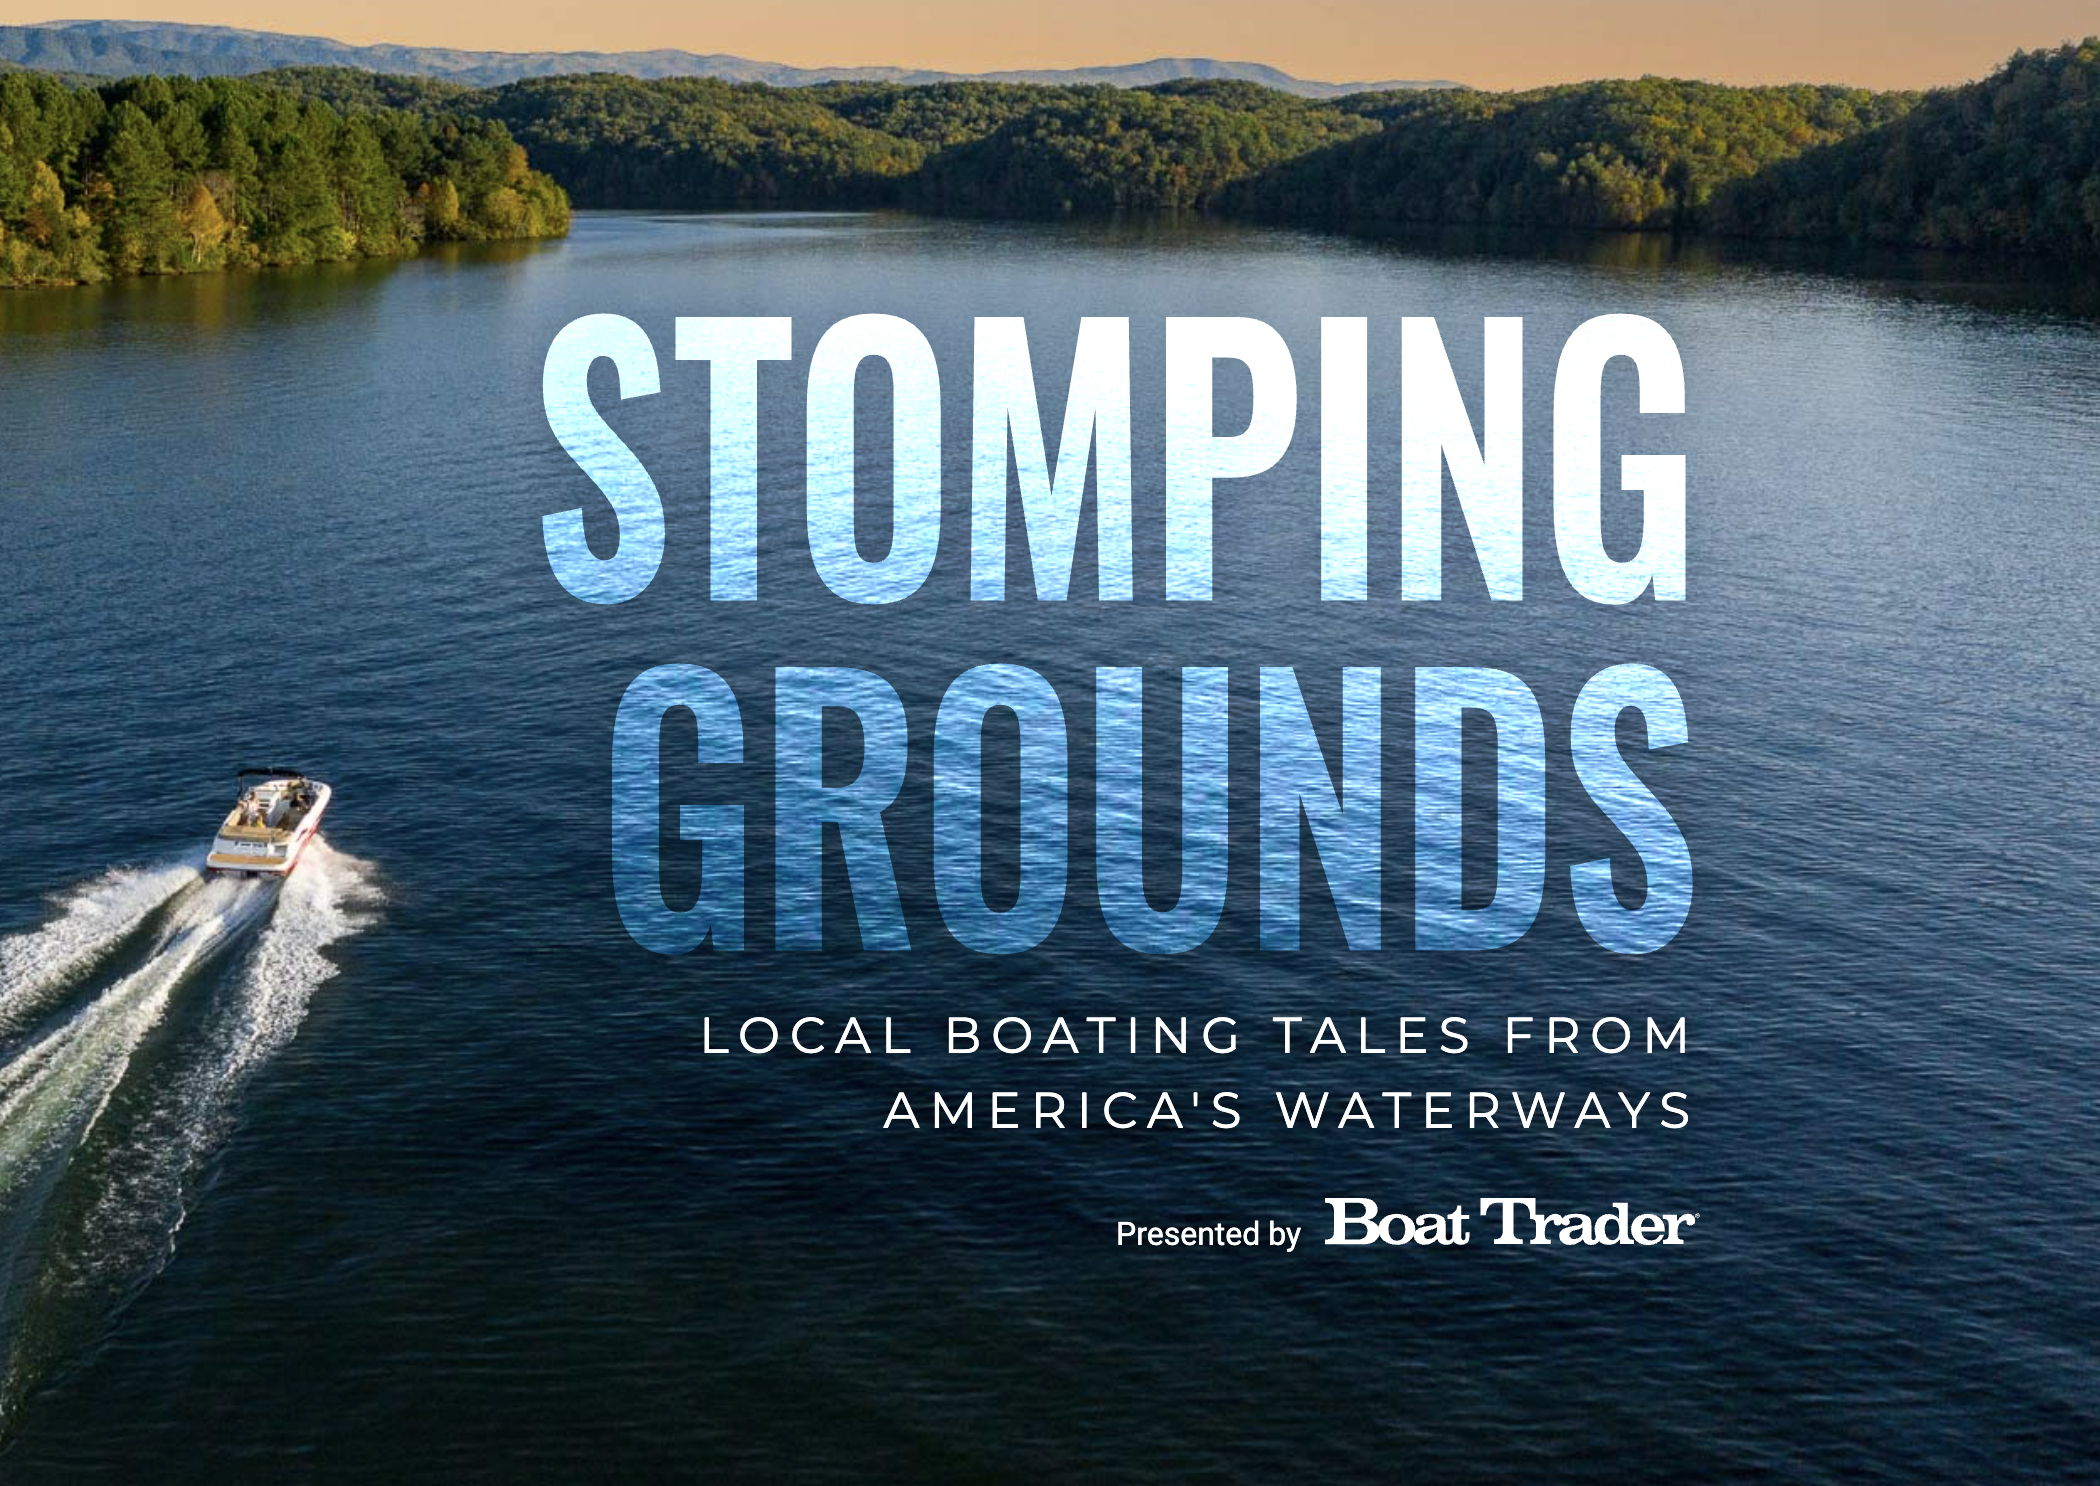 Stomping Grounds by Boat Trader